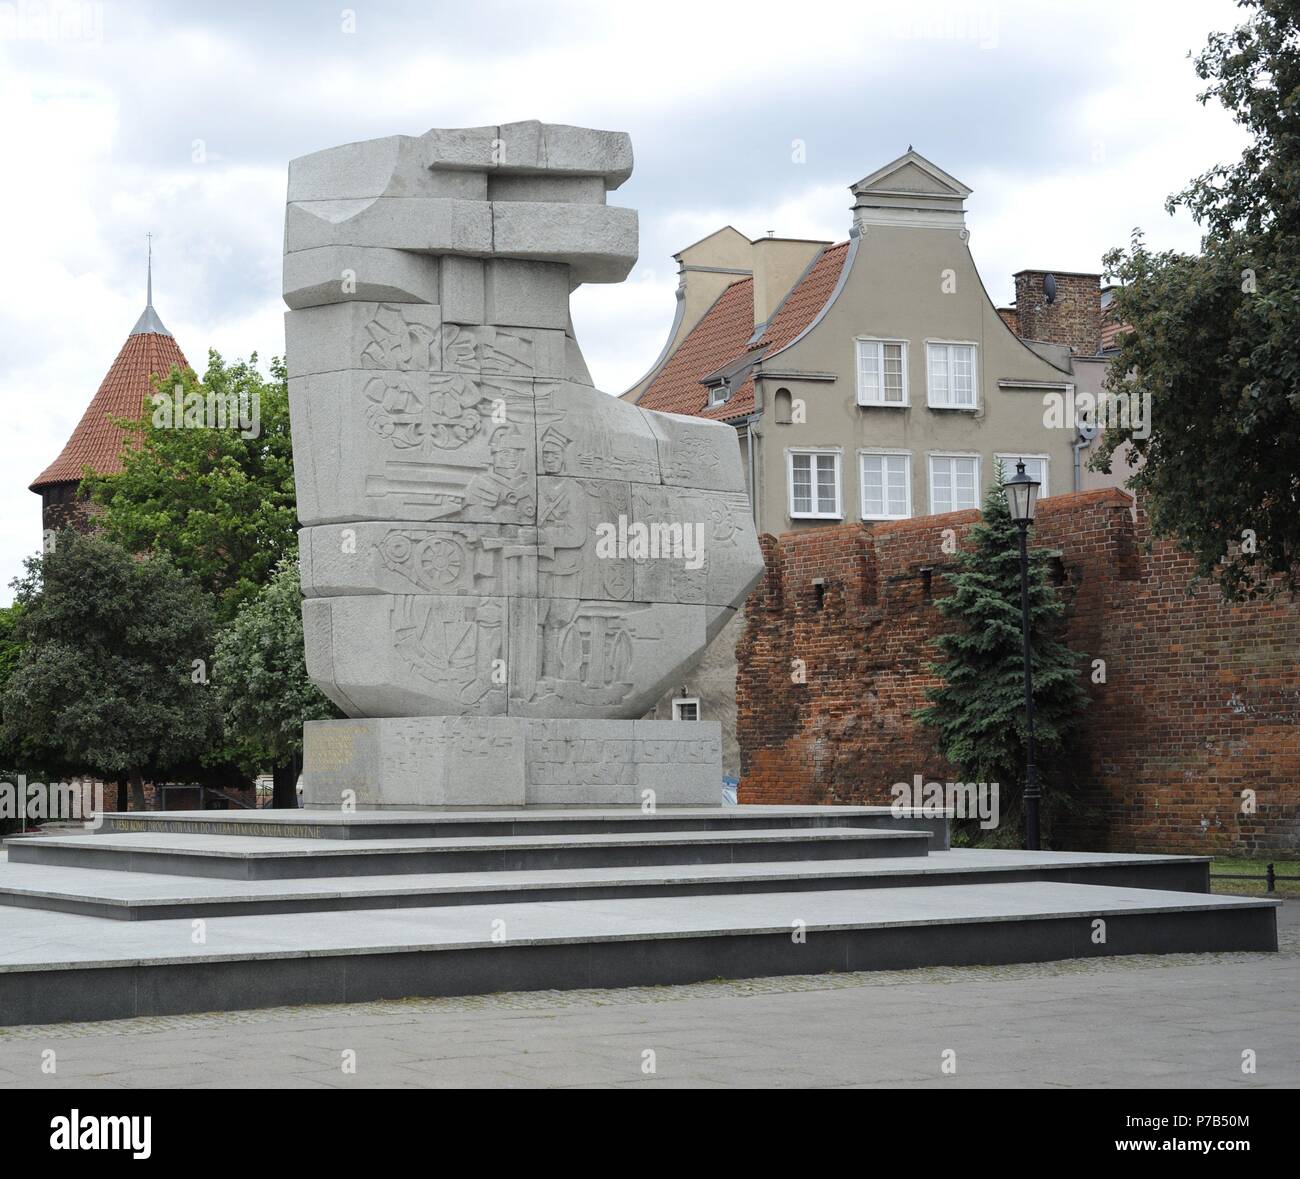 Poland. Gdansk. Monument to Those Who Fell in a fight for the Polish Character in the period from the Gdansk massacre, 1308, until the end of II World War. Erected in 1969 by Wawrzyniec Samp (b. 1939) and Wies aw Pietron (b. 1934) and symbolises an axe stuck in the ground. Square at Podwale Staromiejskie Street. Stock Photo